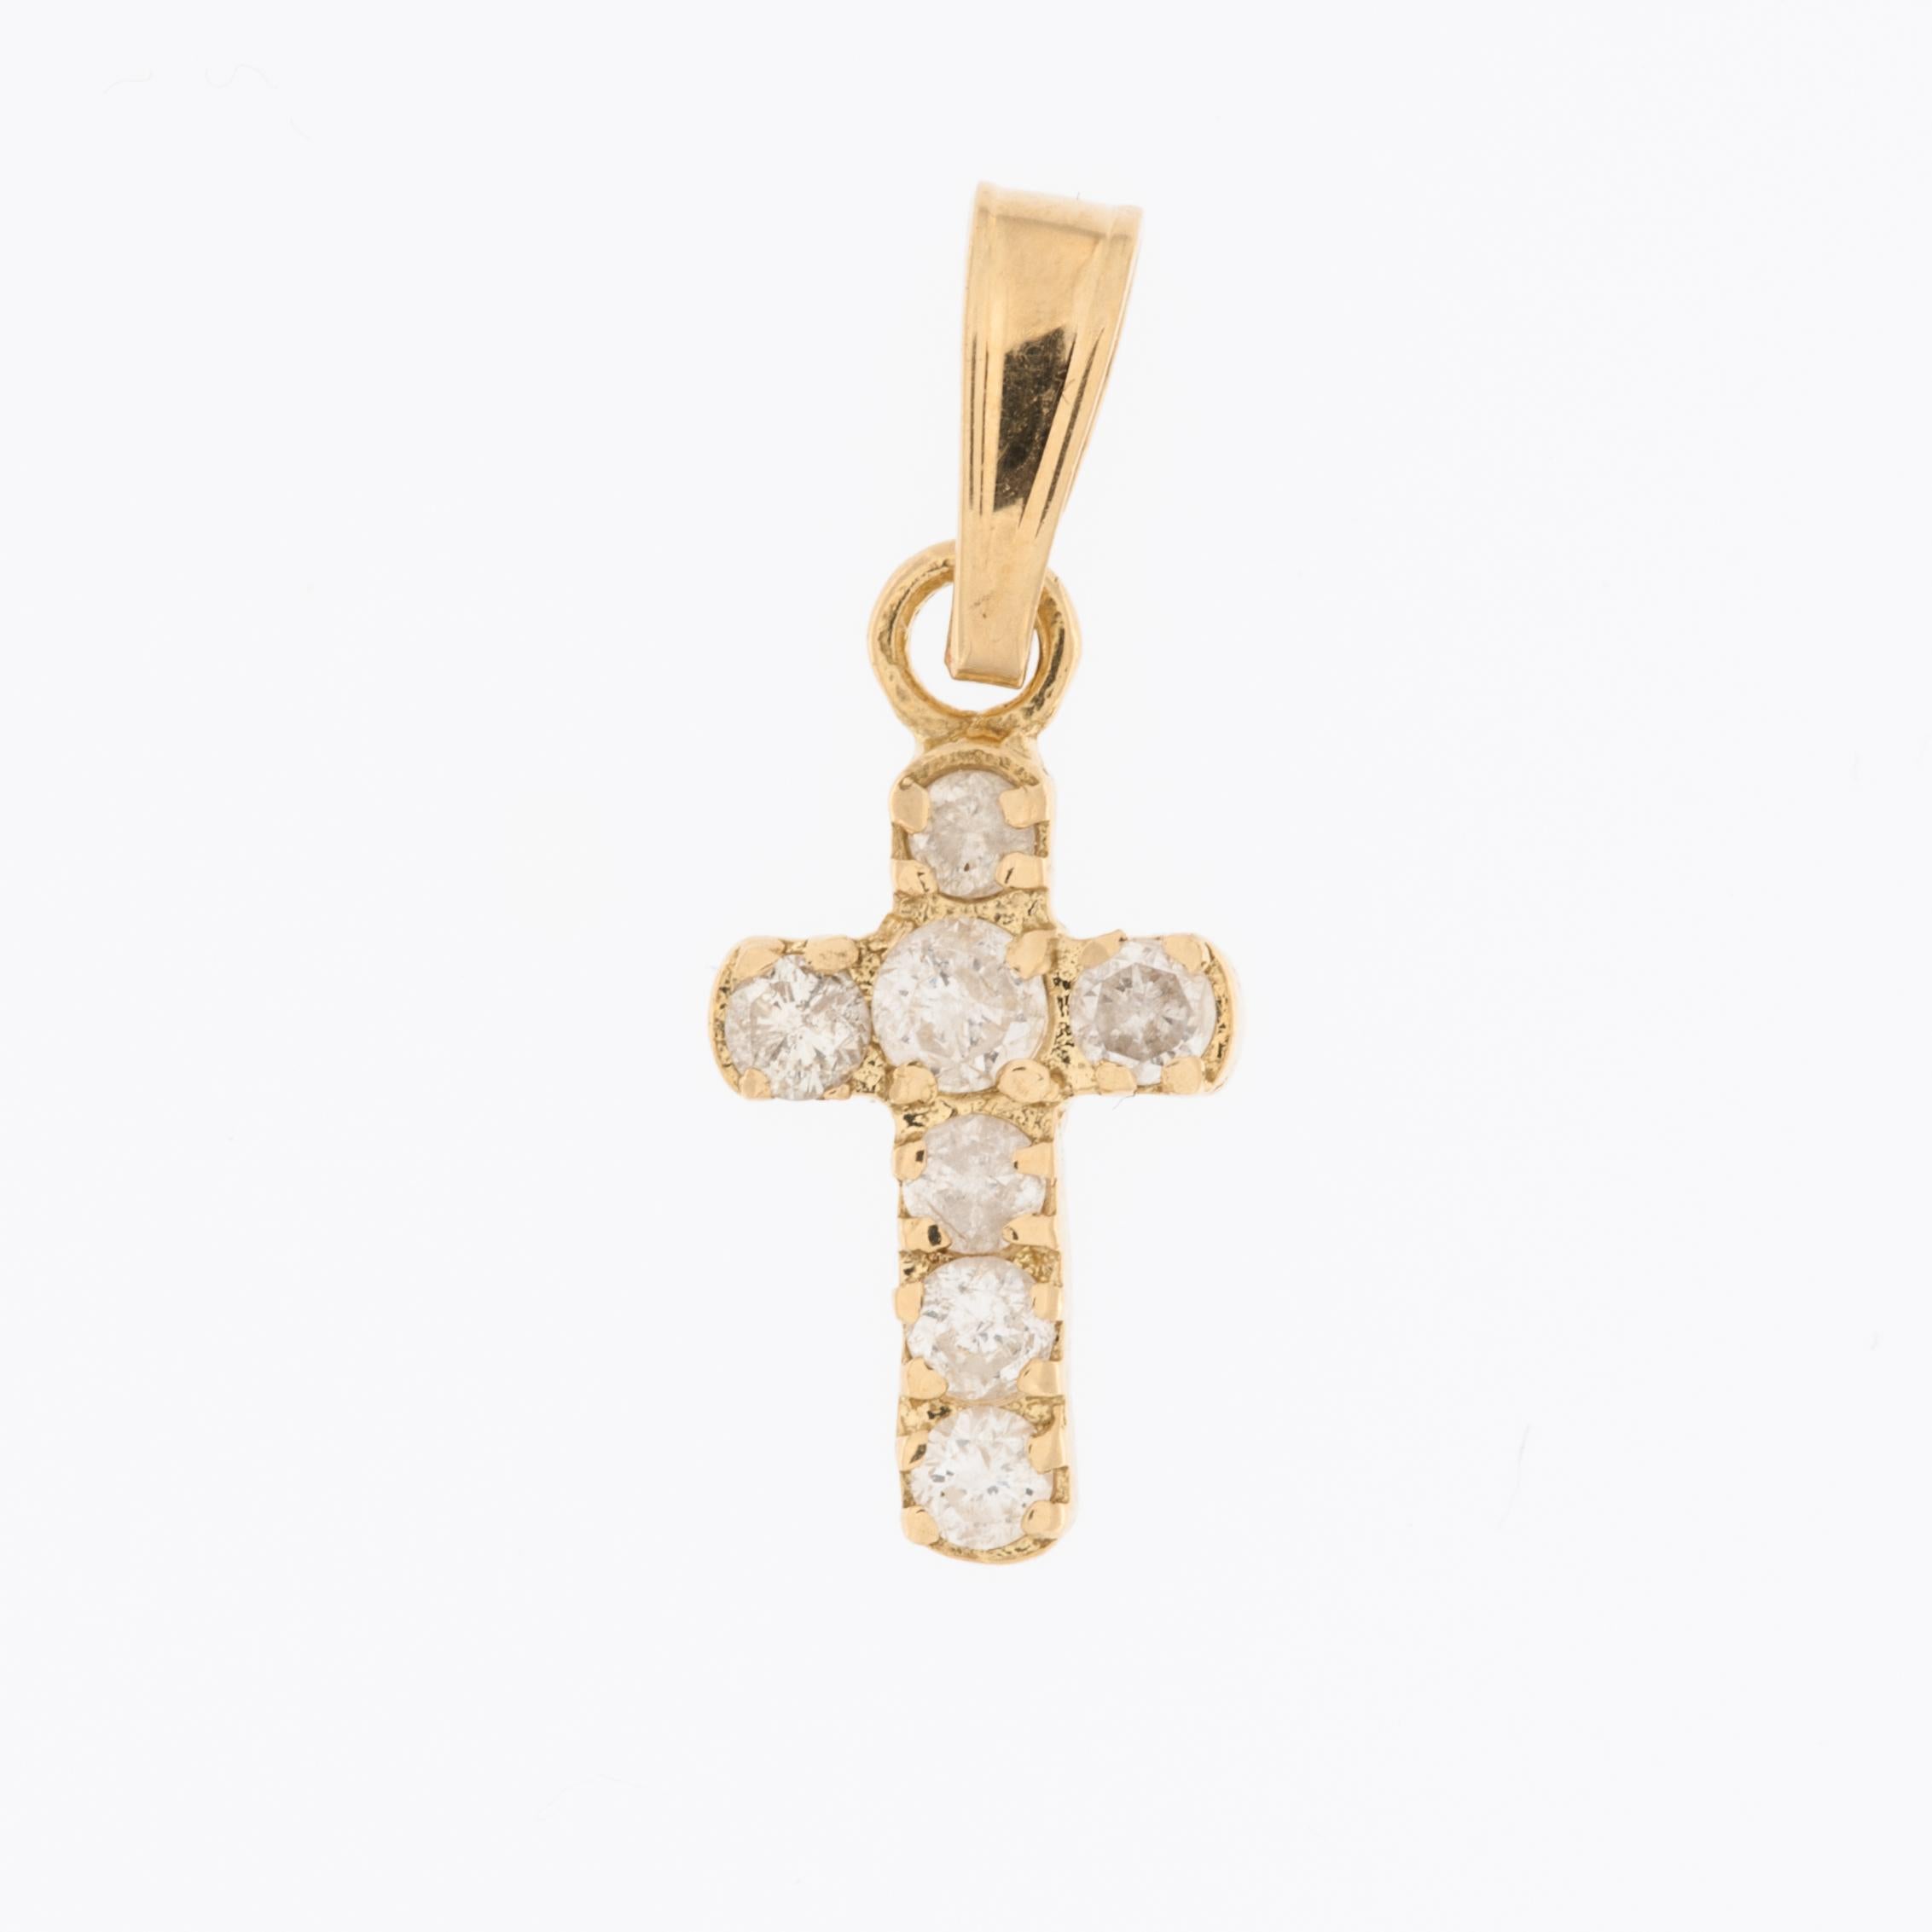 The French 18kt Yellow Gold Cross with Diamonds is an elegant piece of jewelry. 

This cross pendant is crafted from 18-karat yellow gold, which is known for its rich and warm color. 
The design of this cross pendant is classic one, combining the